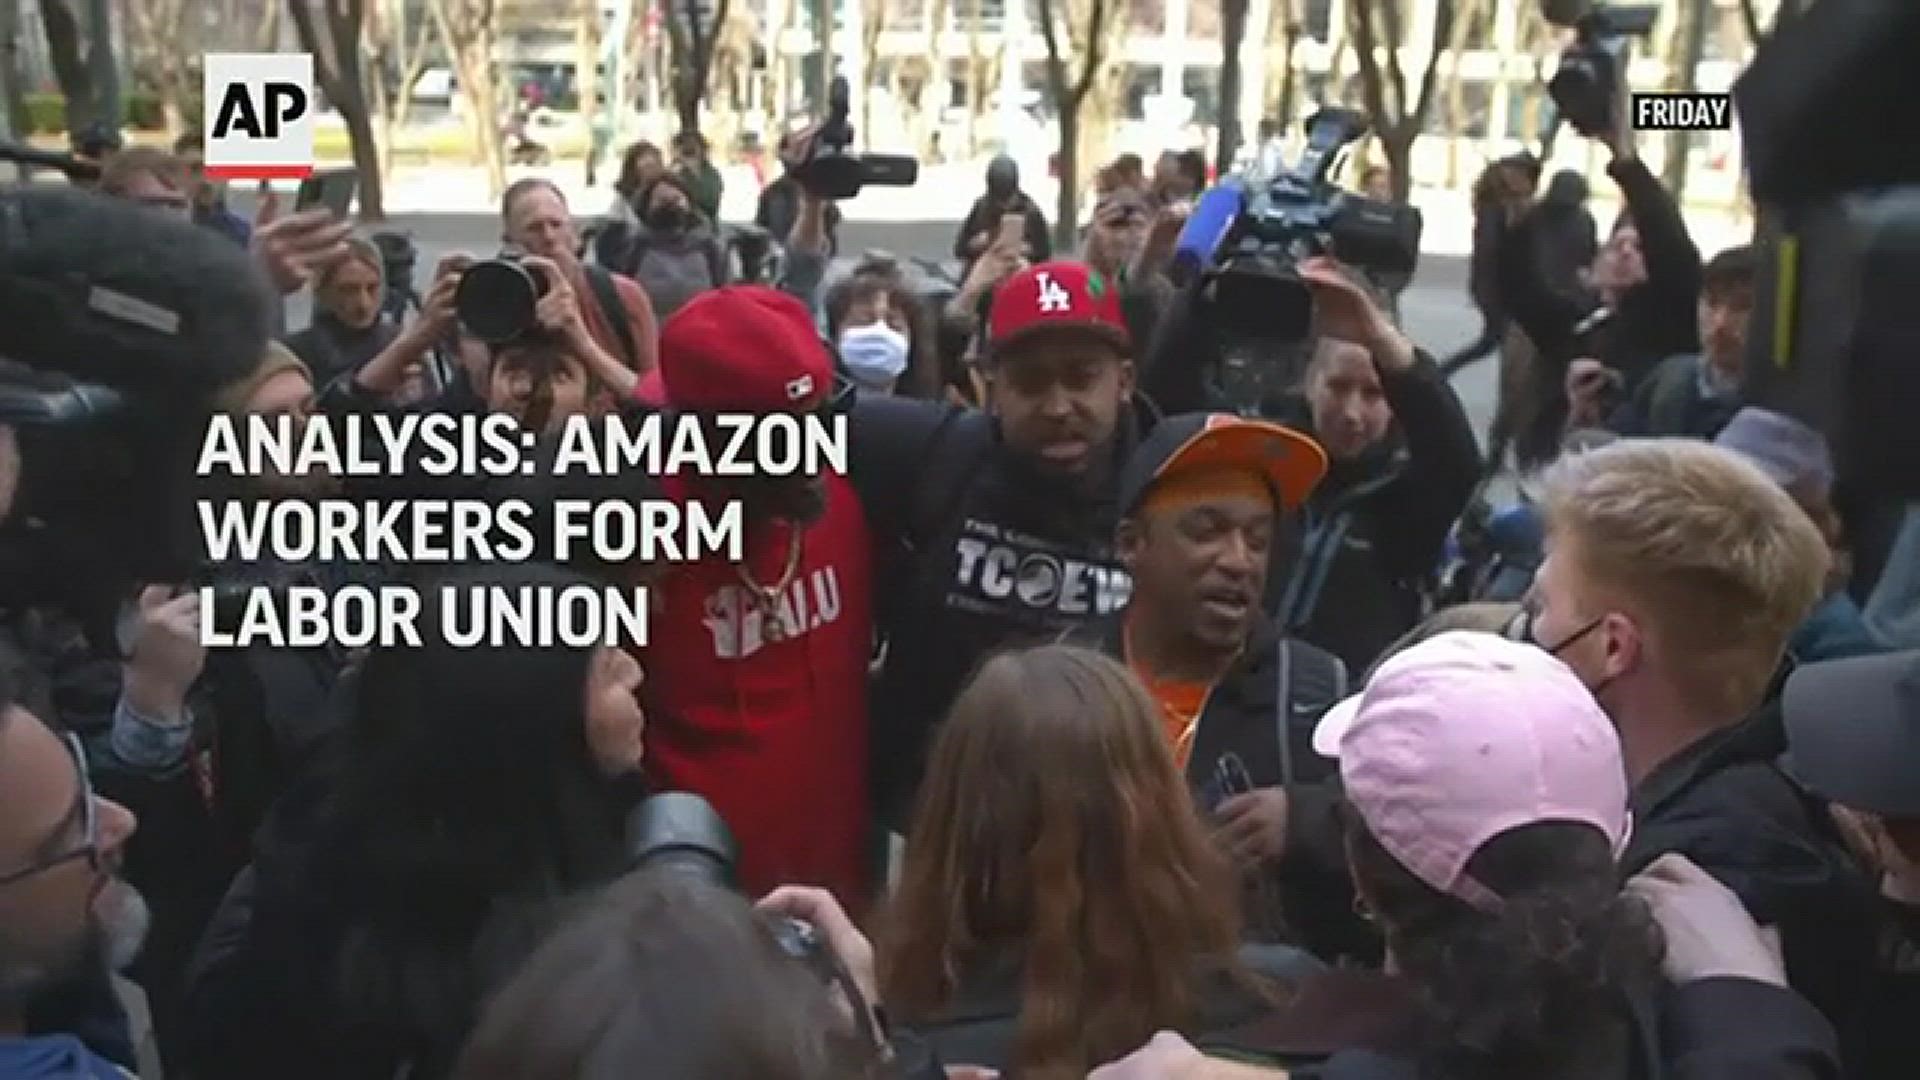 The successful Amazon Labor Union drive in New York may have come down to timing, a professor of labor studies suggests.